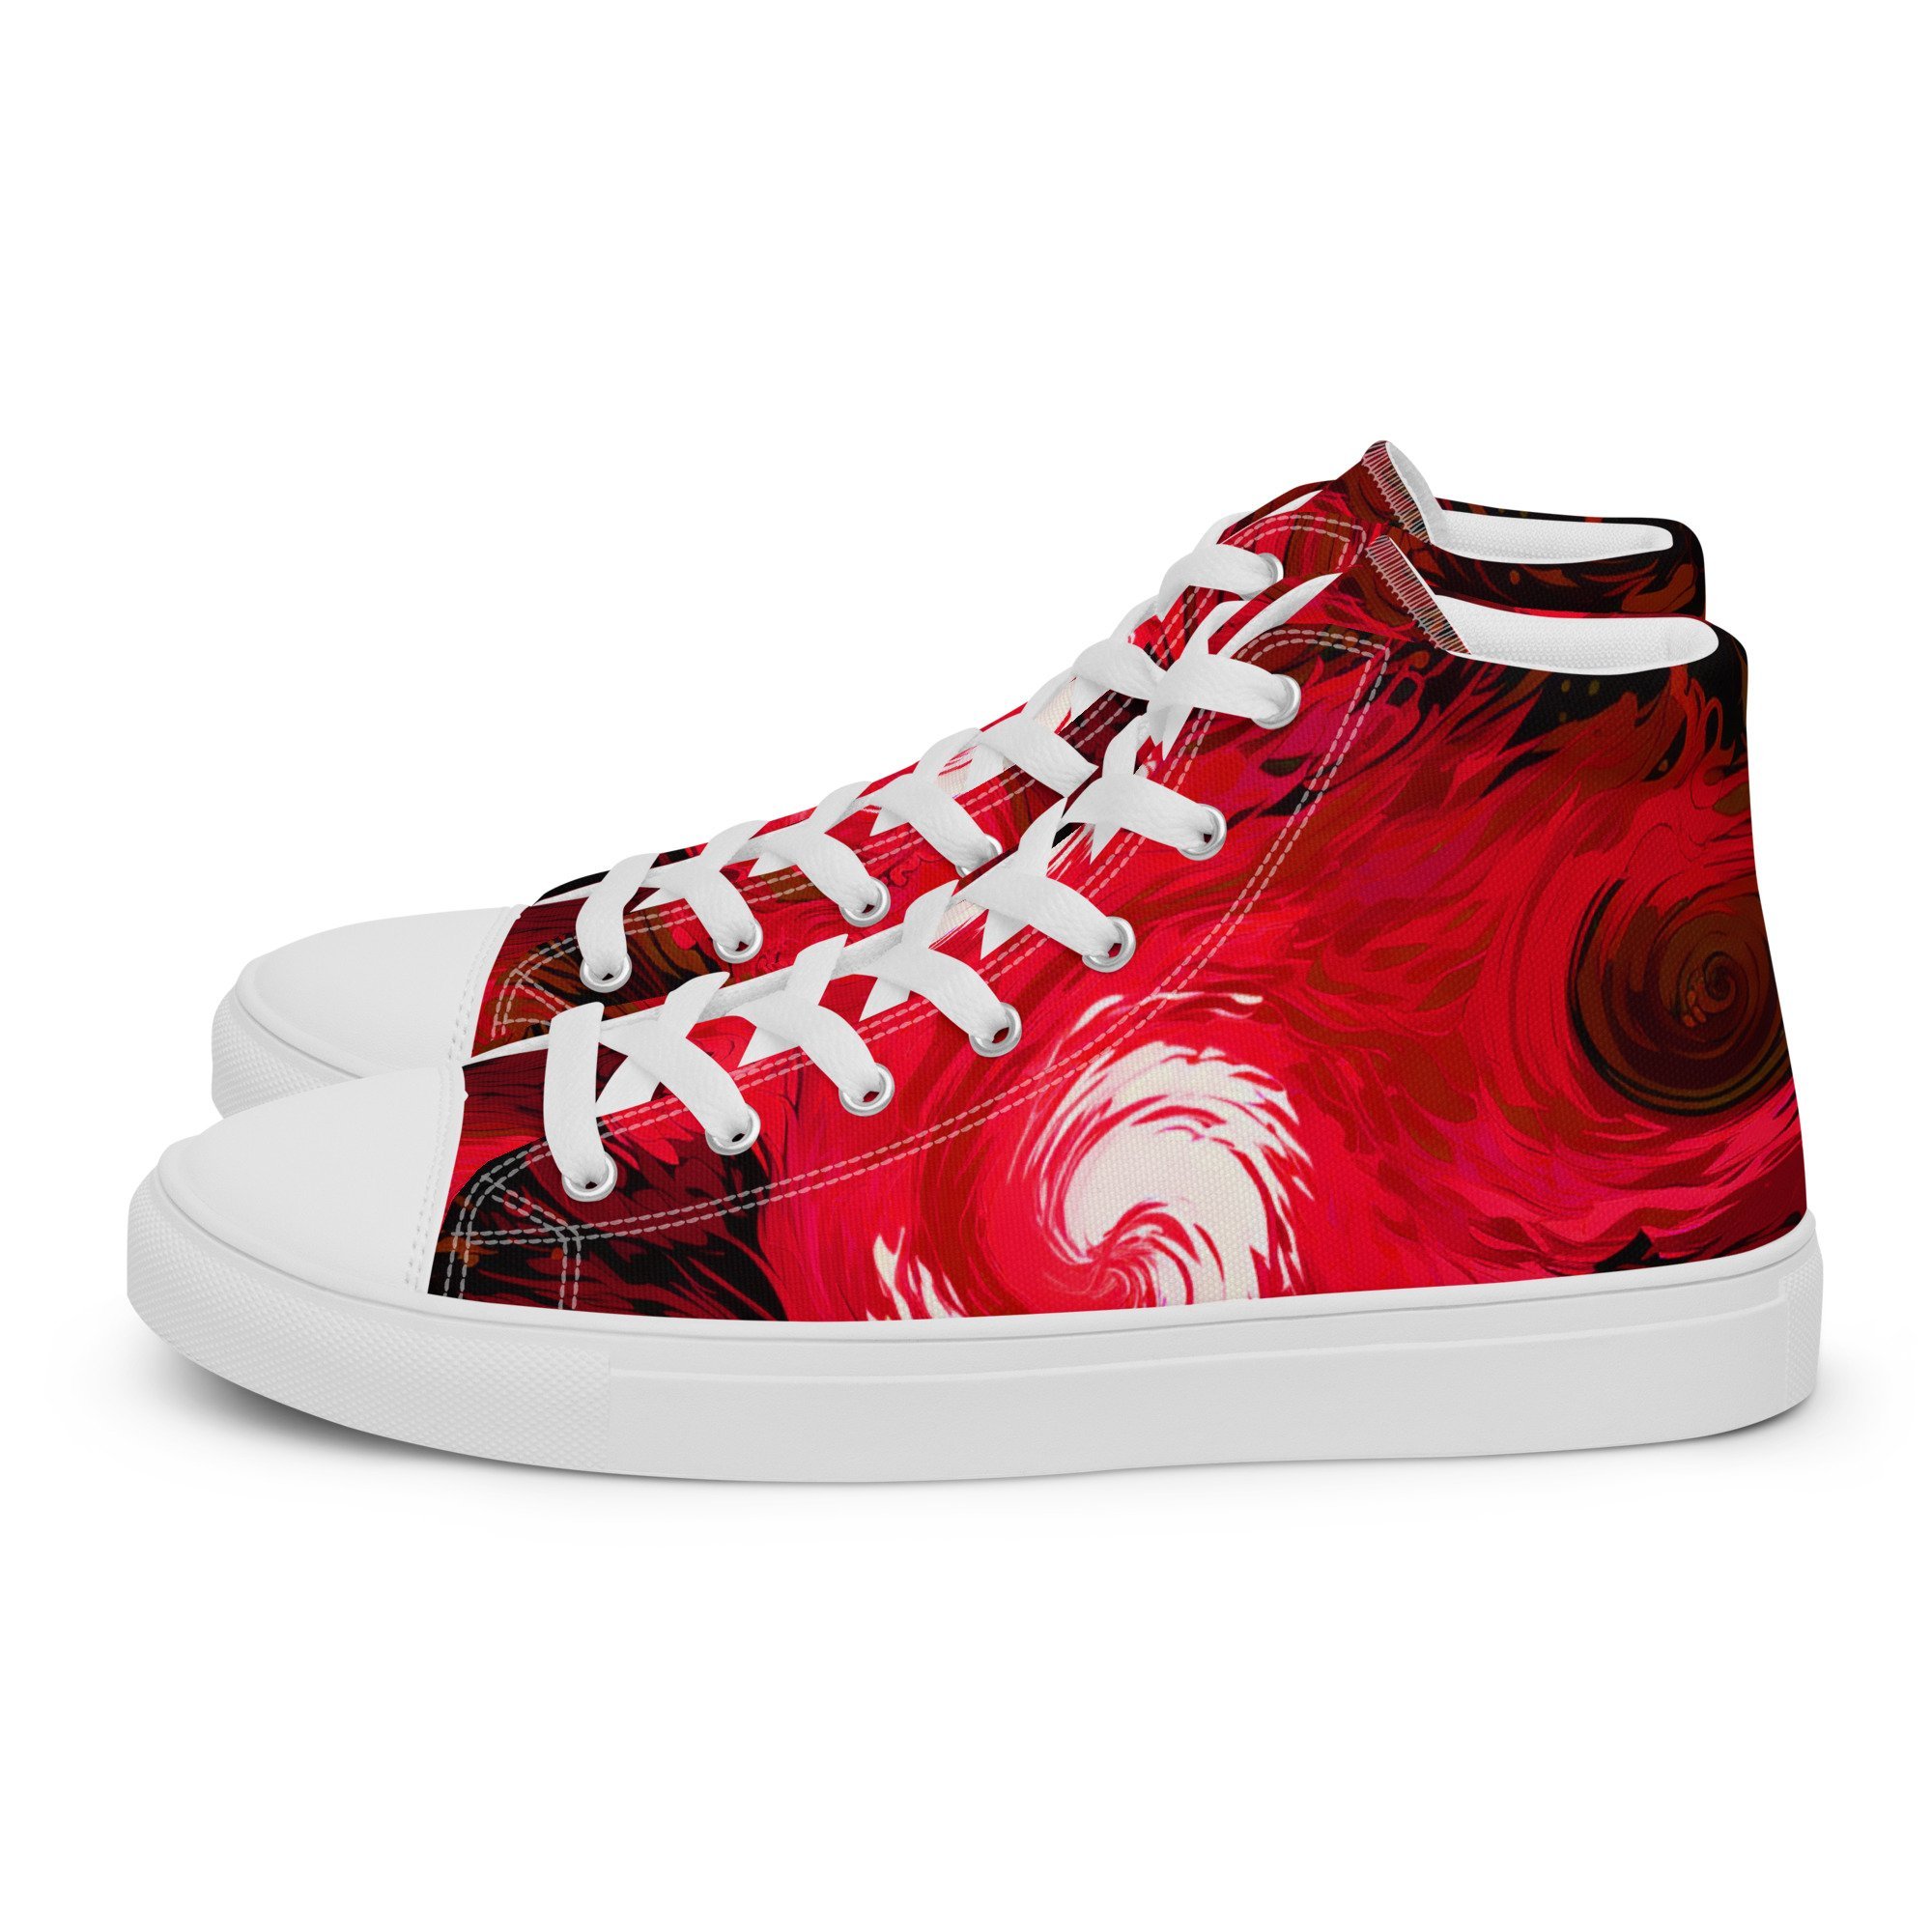 mens-high-top-canvas-shoes-white-left-655279c2bf6d8.jpg